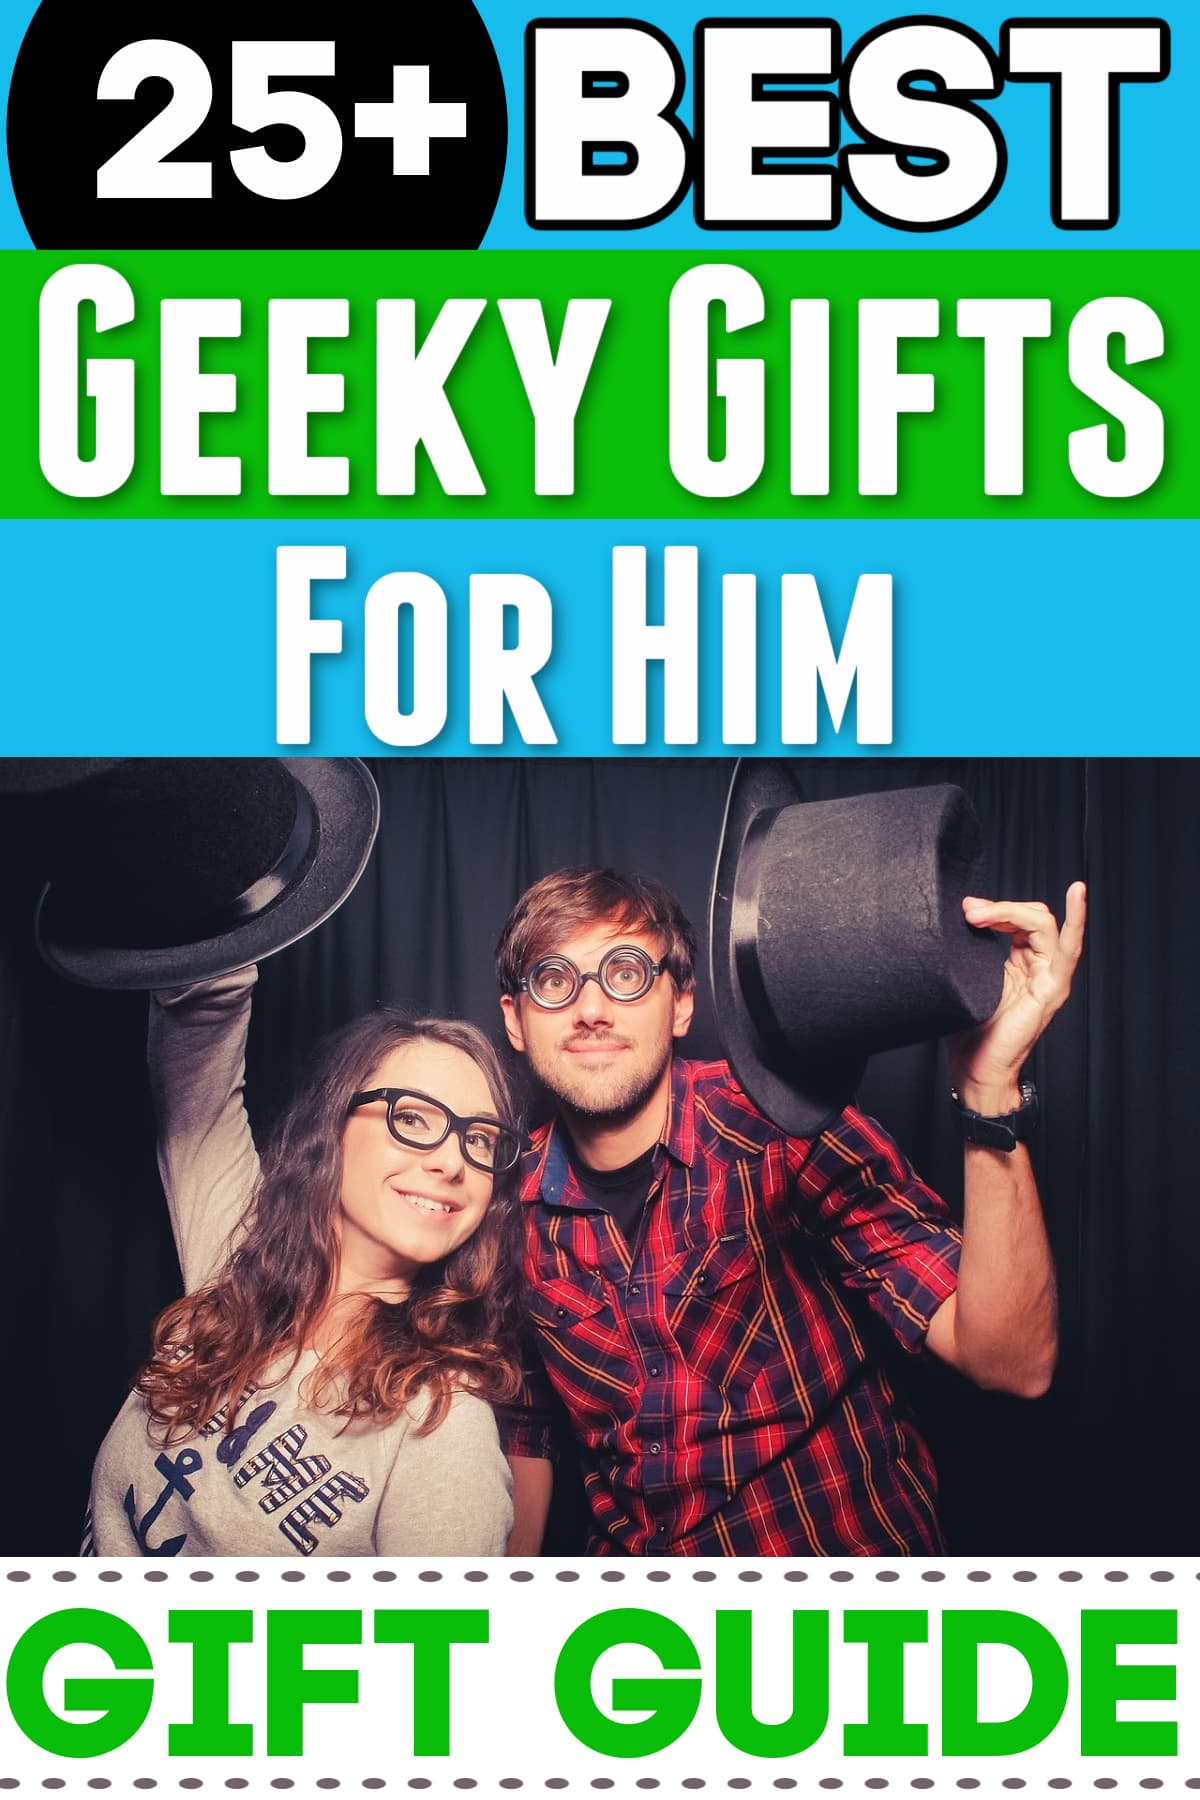 geeky couple - Geek Gifts For Him On Valentine's Day